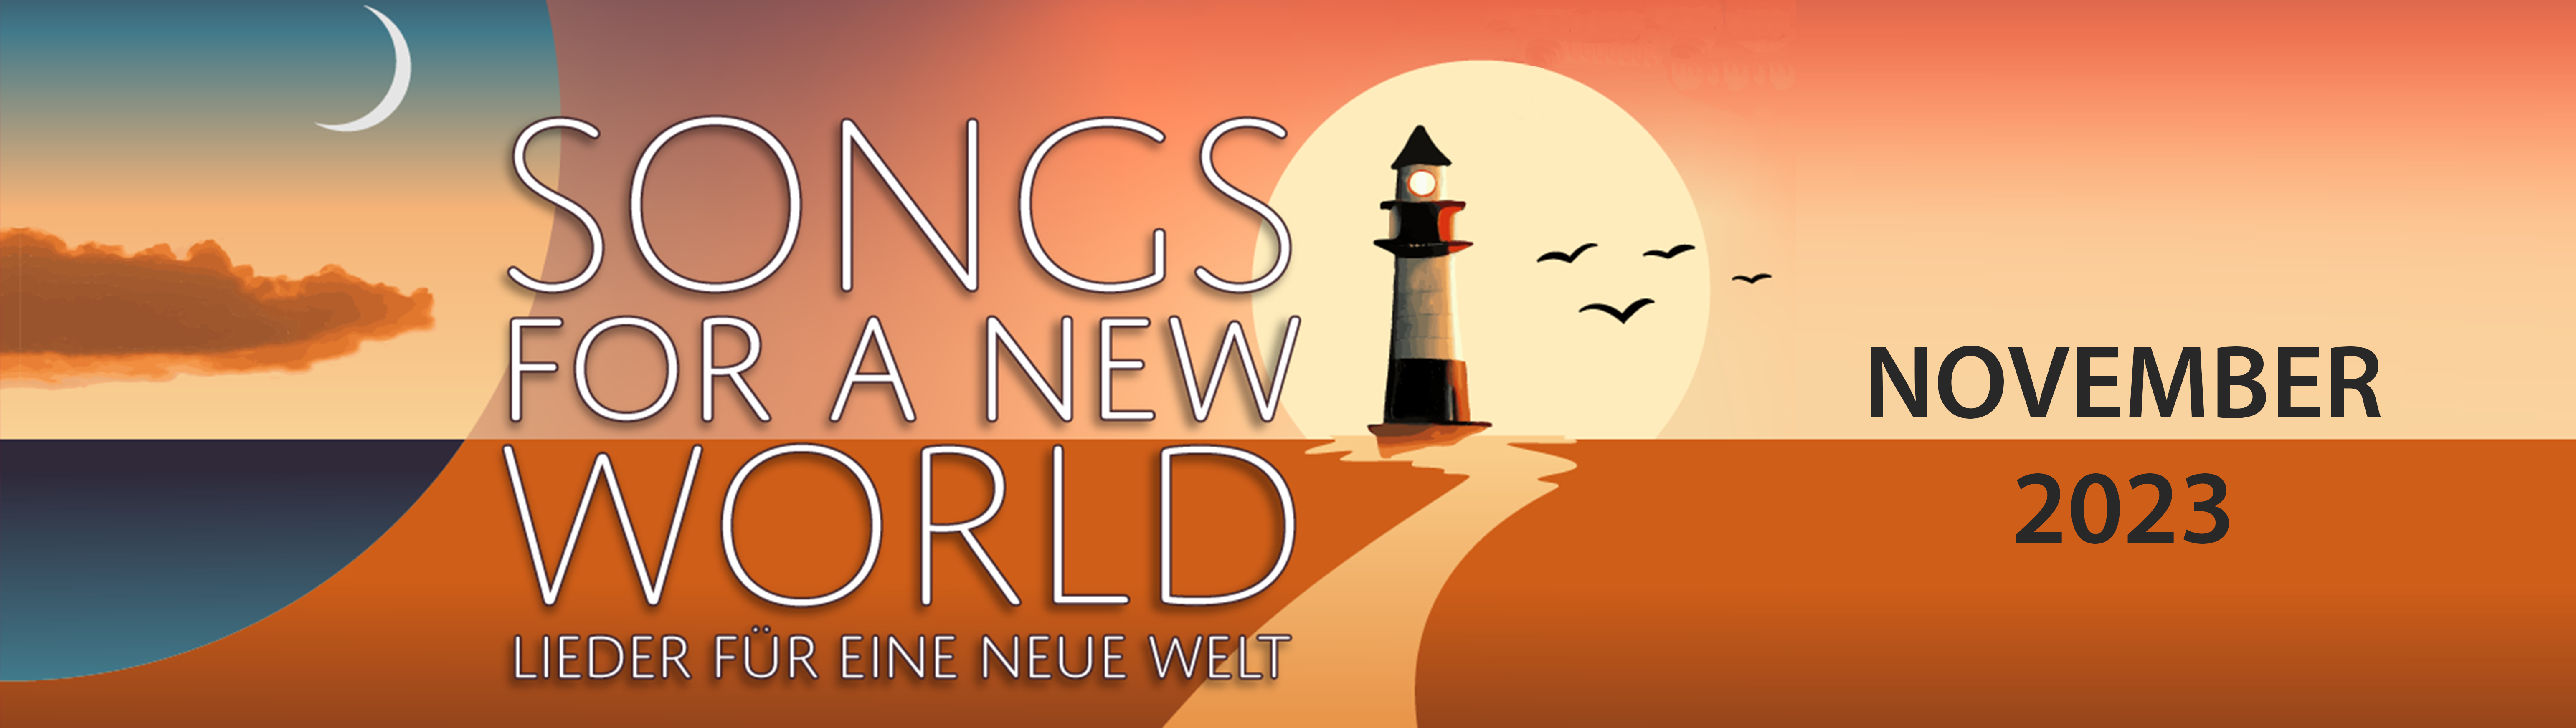 website-banner-songs-for-a-new-world2